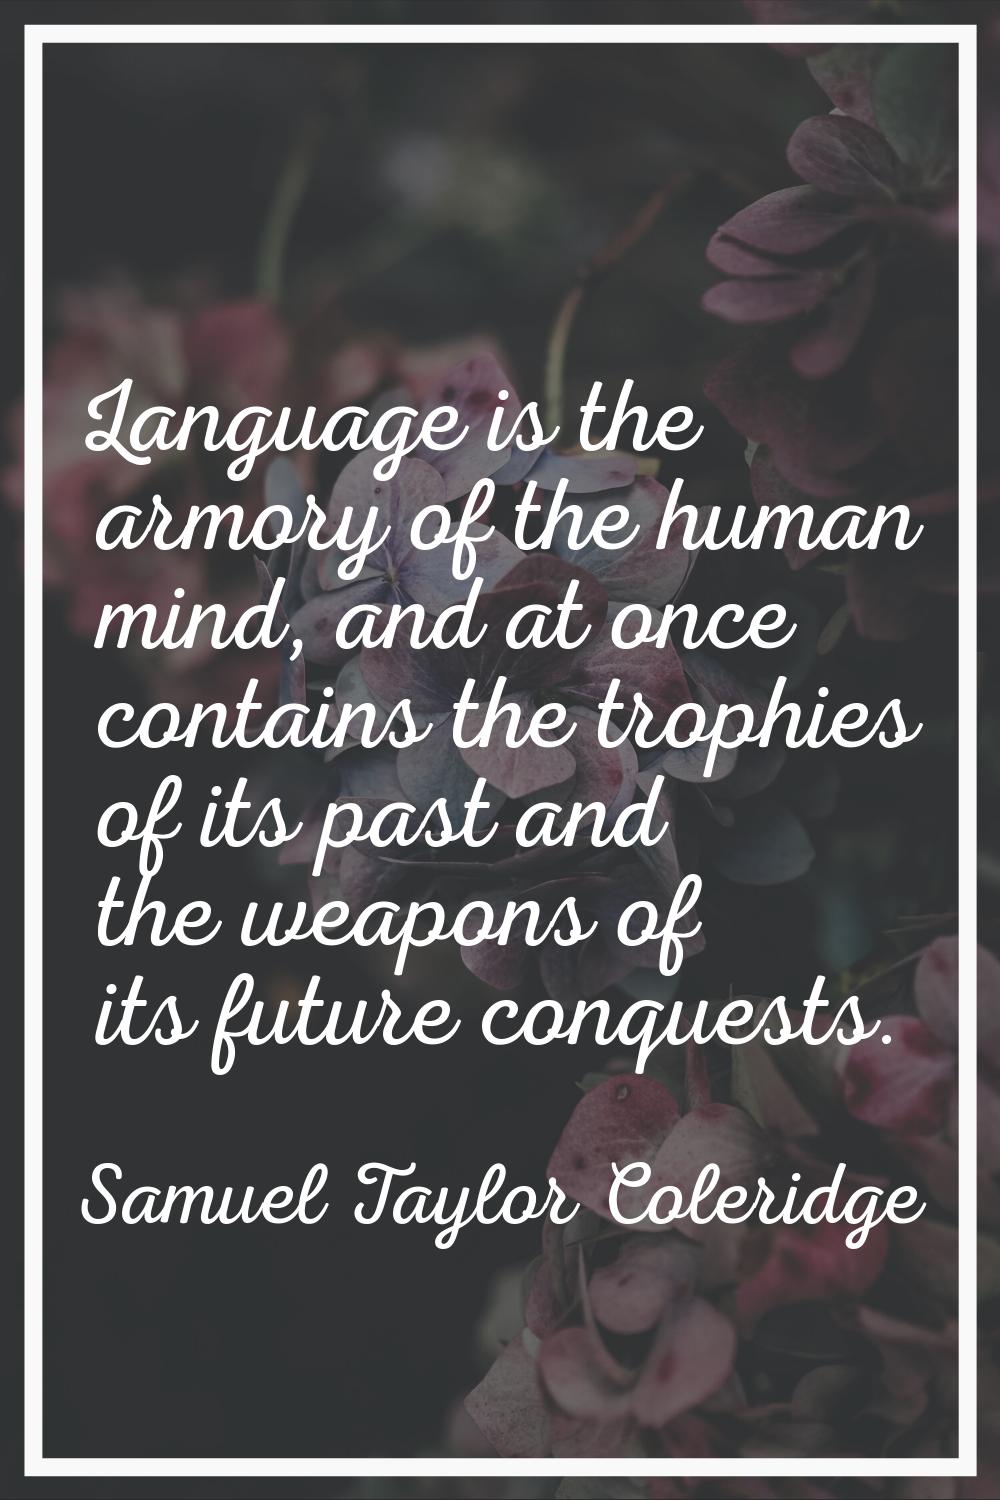 Language is the armory of the human mind, and at once contains the trophies of its past and the wea